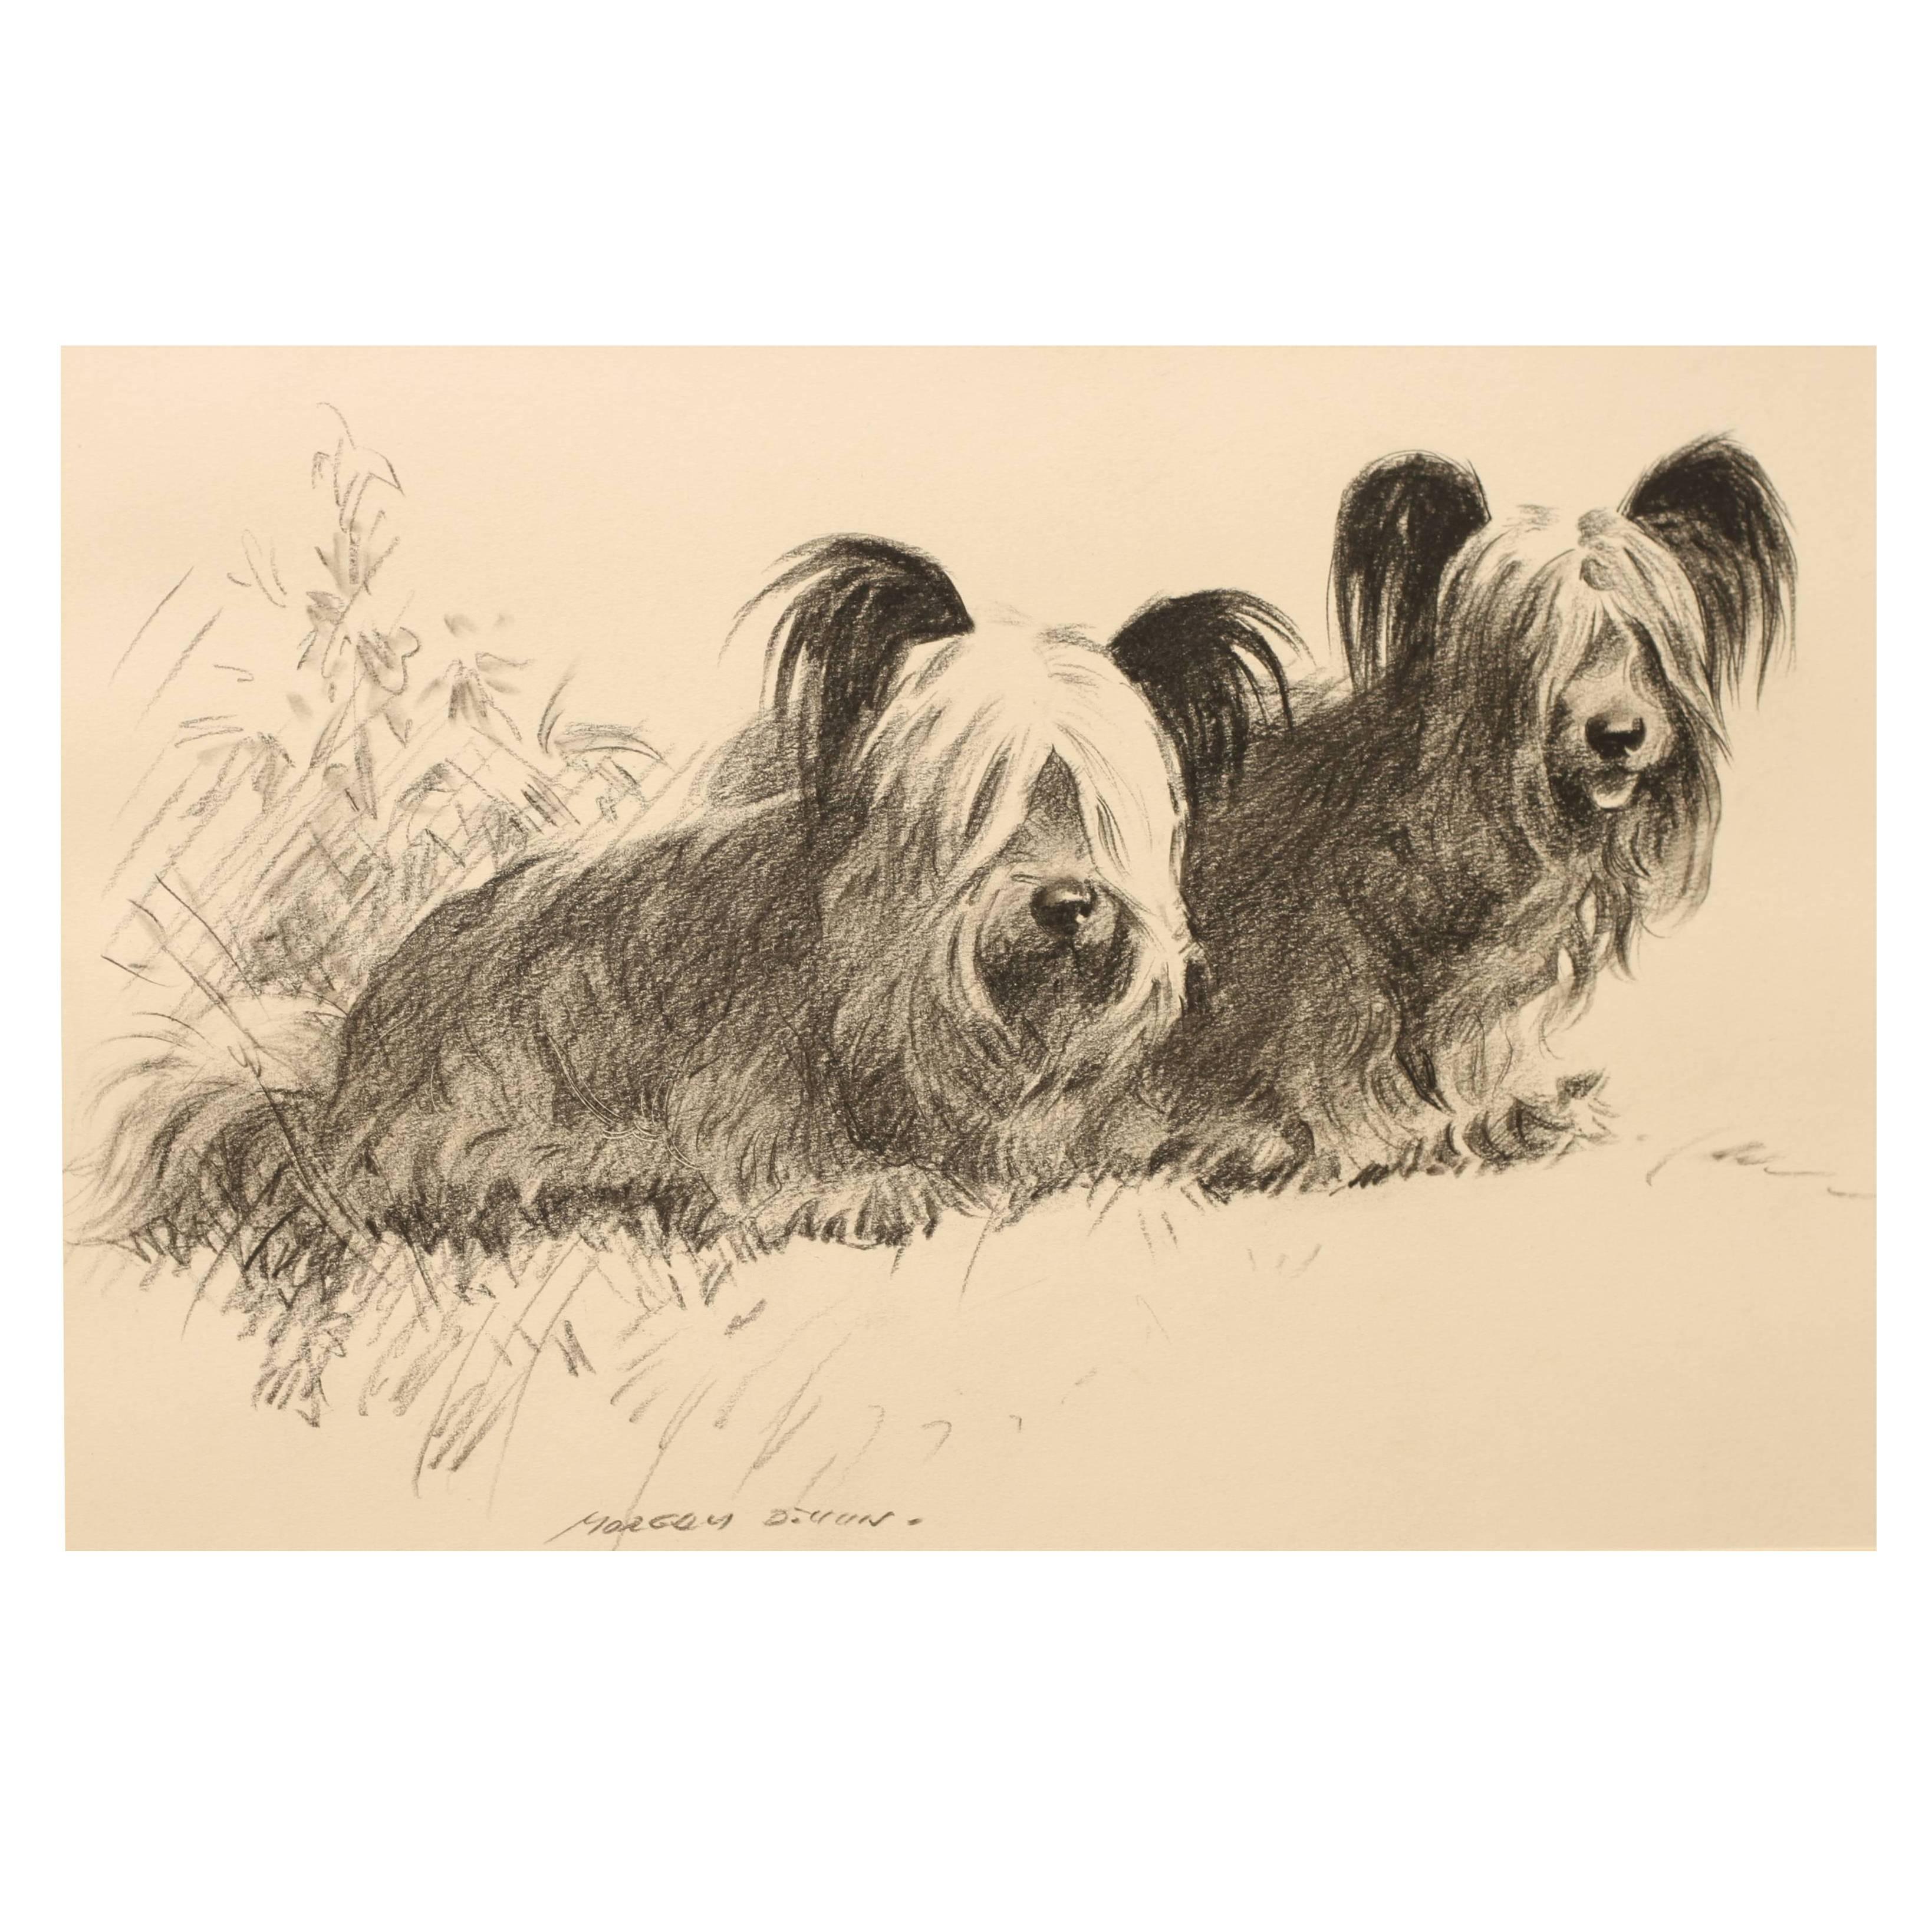 Pencil and Crayon Drawing of Skye Terrier Dogs   For Sale